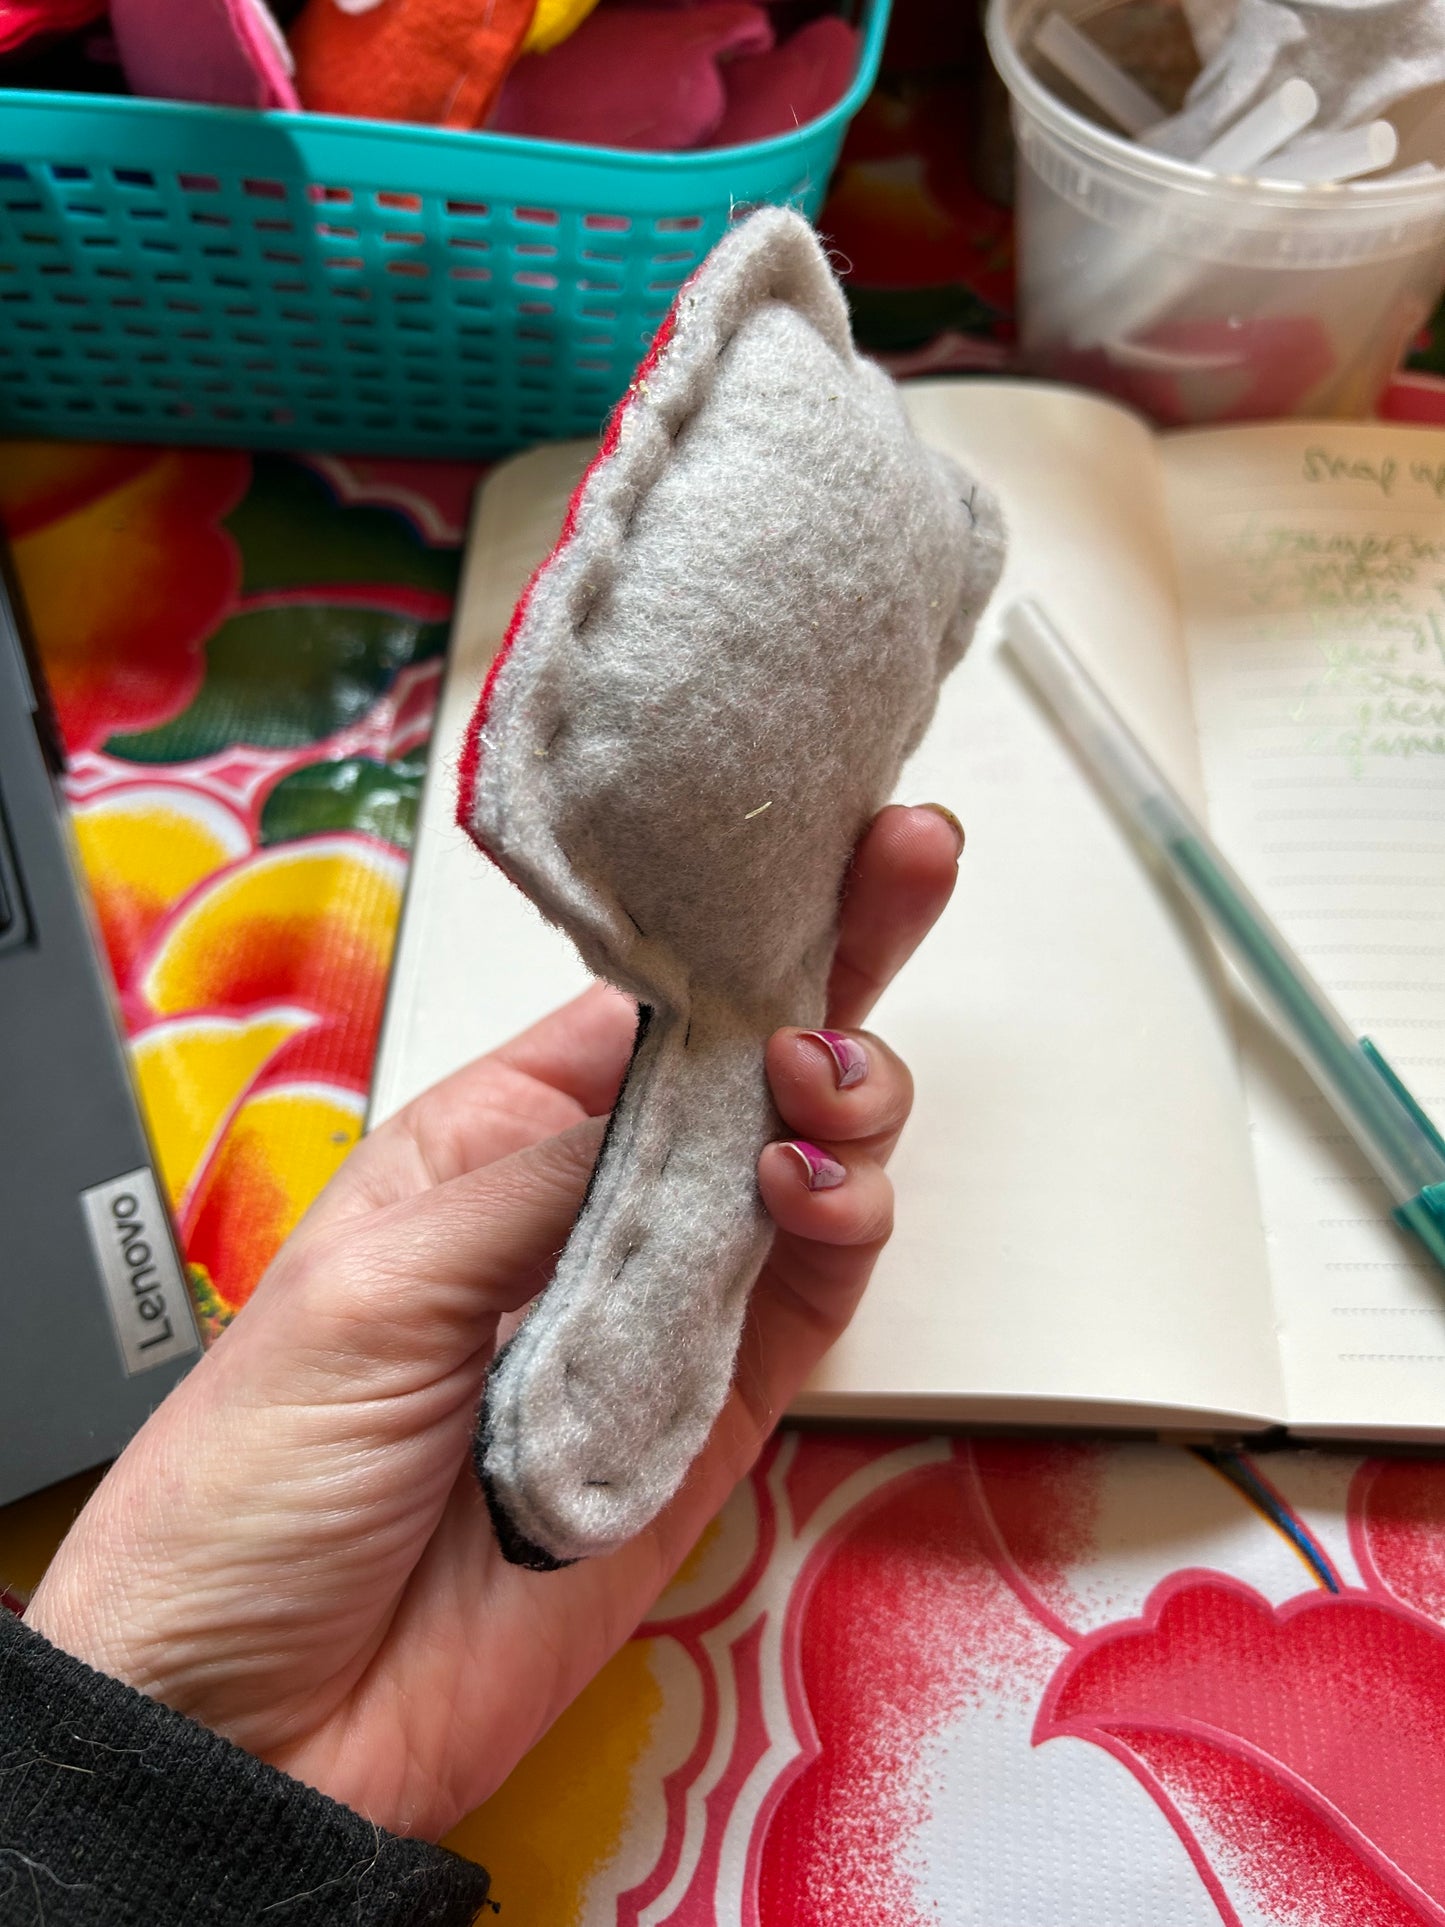 A person holding a catnip cat toy for sale. The view of it is the side/back, it is grey felt, cut in the shape of a cleaver. There is a notebook and pen in the background.